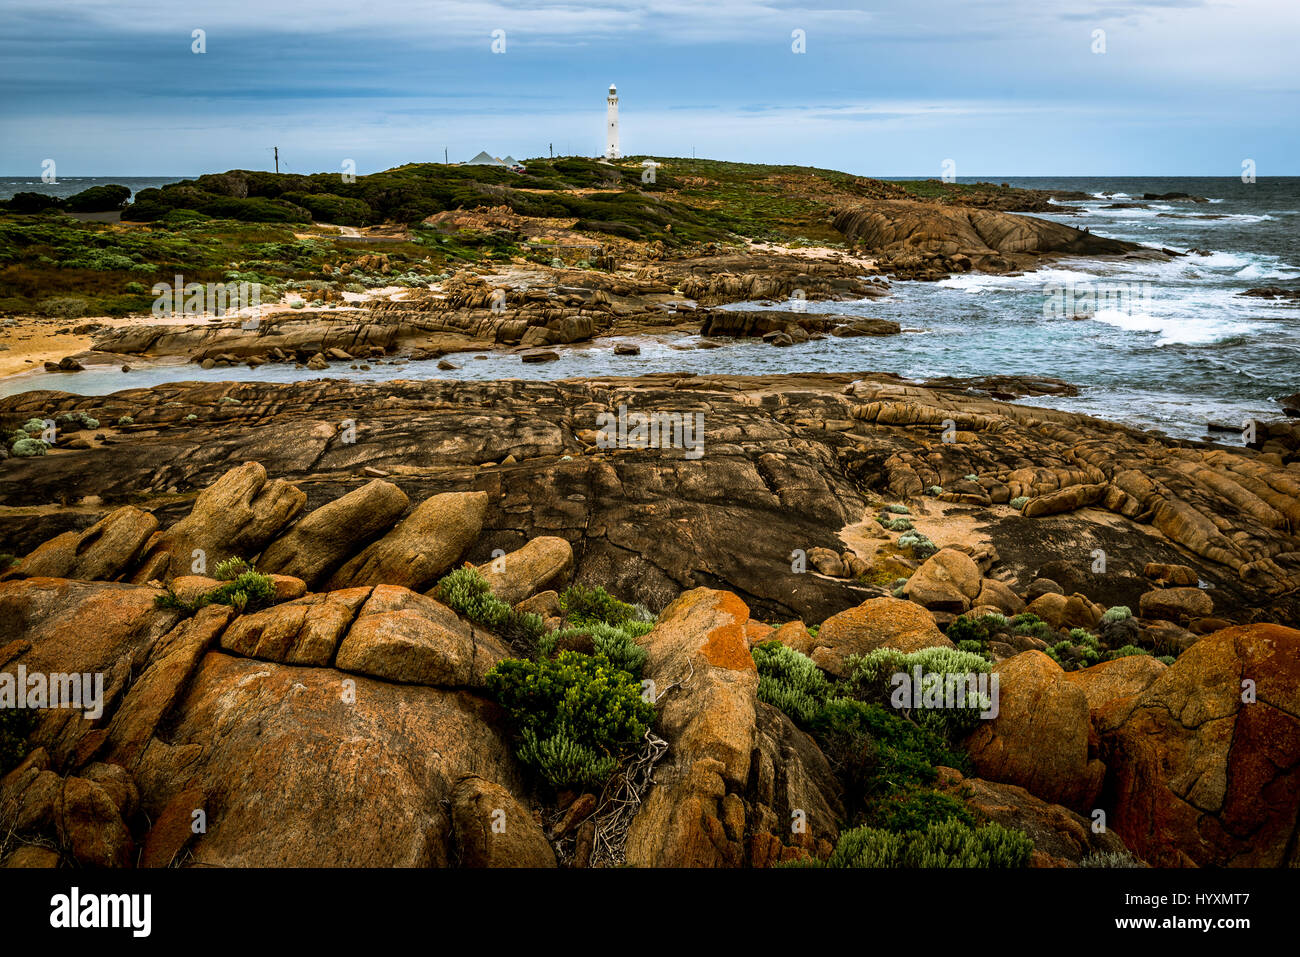 Cape Leeuwin is considered to be the point where the Indian and Southern oceans meets and is the most south-westerly mainland point of the Australia. Stock Photo